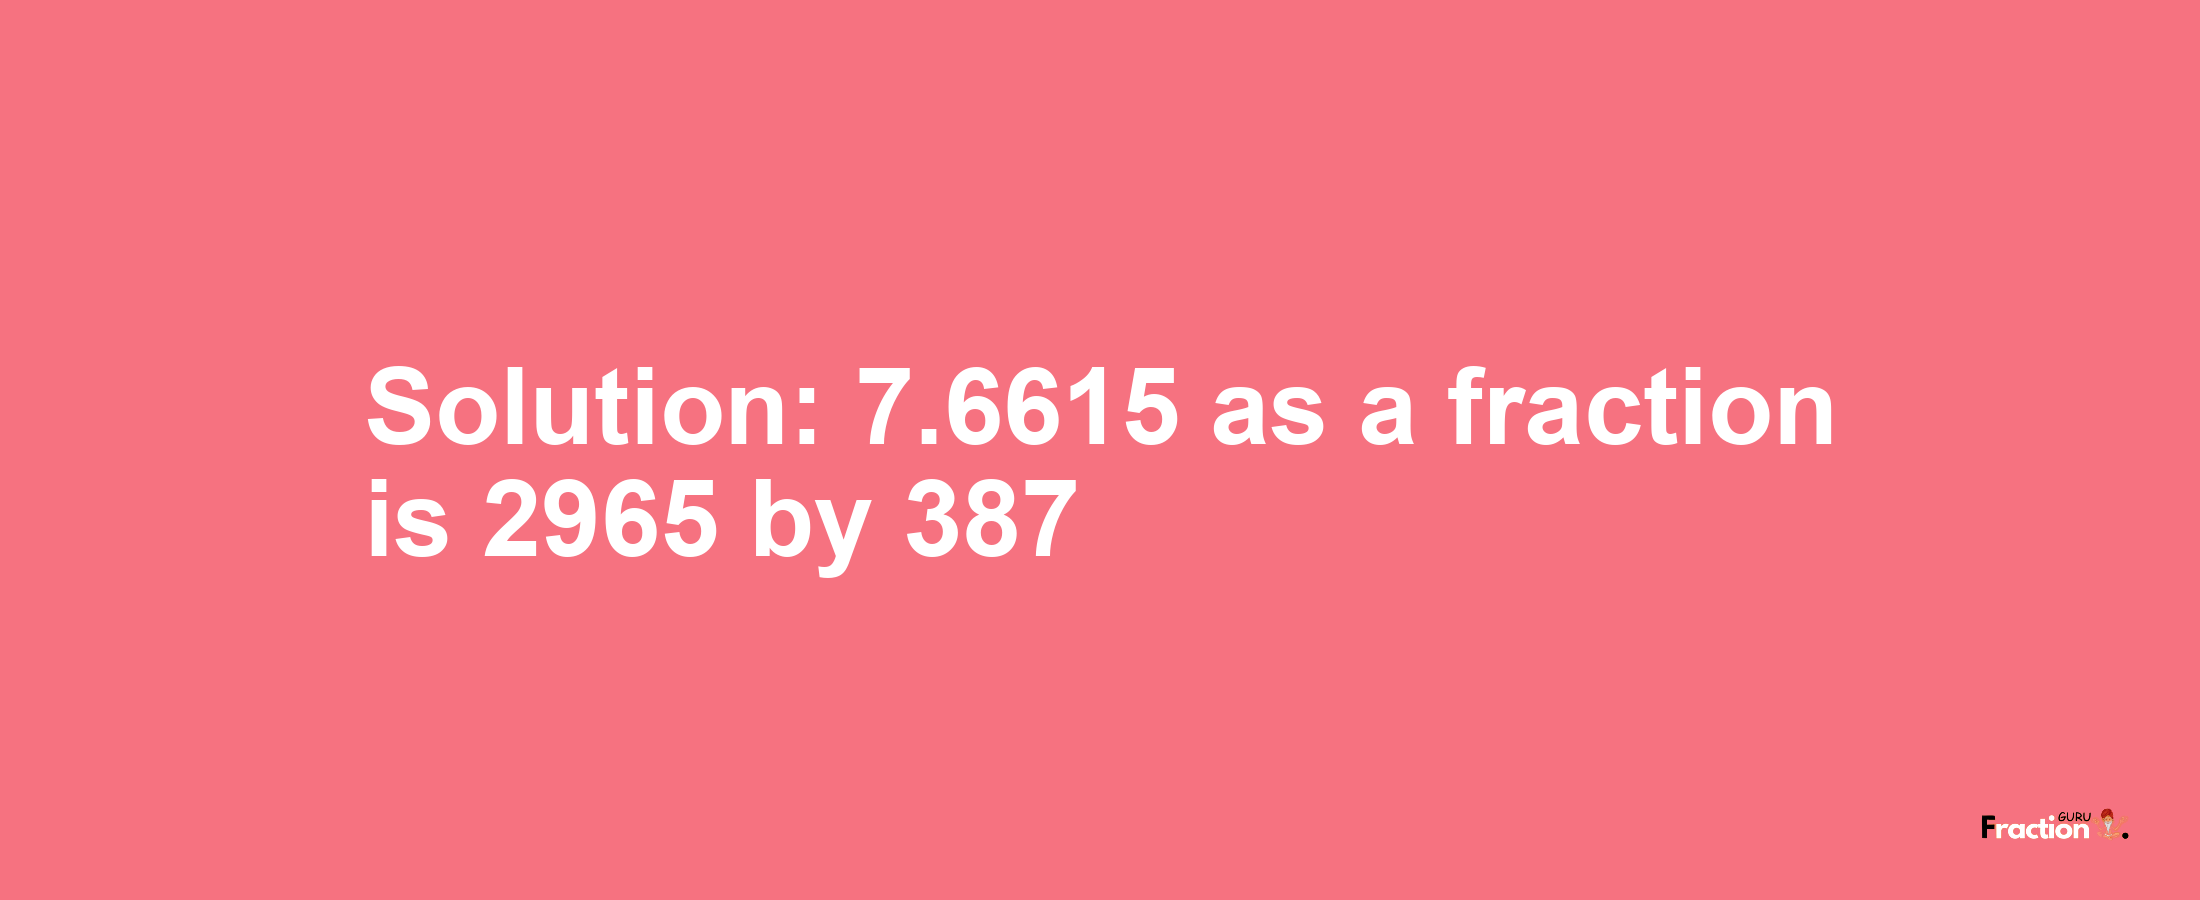 Solution:7.6615 as a fraction is 2965/387